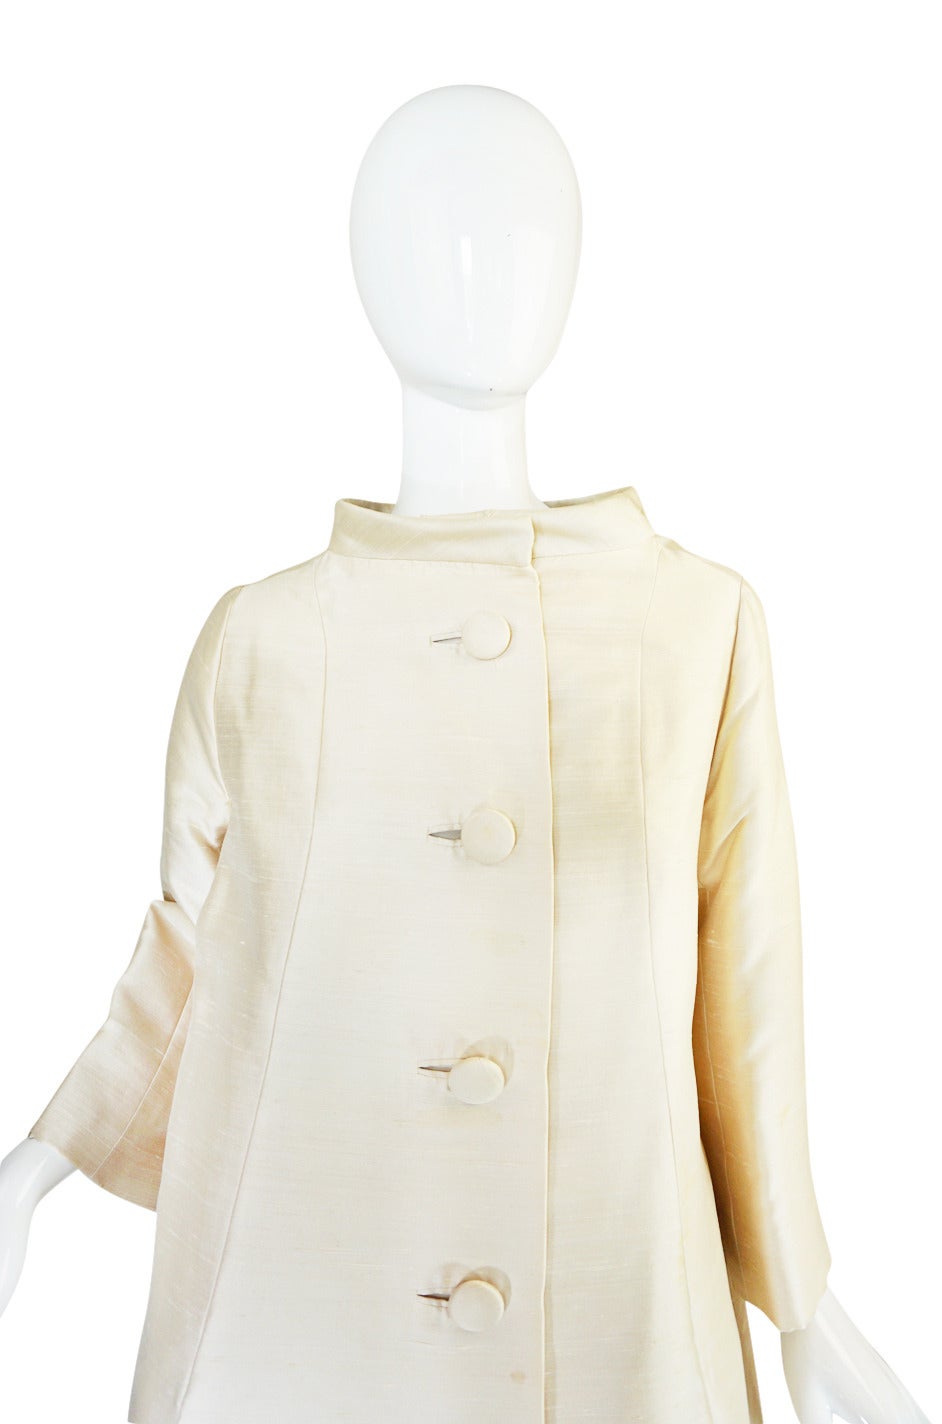 c1960 Christian Dior London Couture Numbered Coat & Dress 1